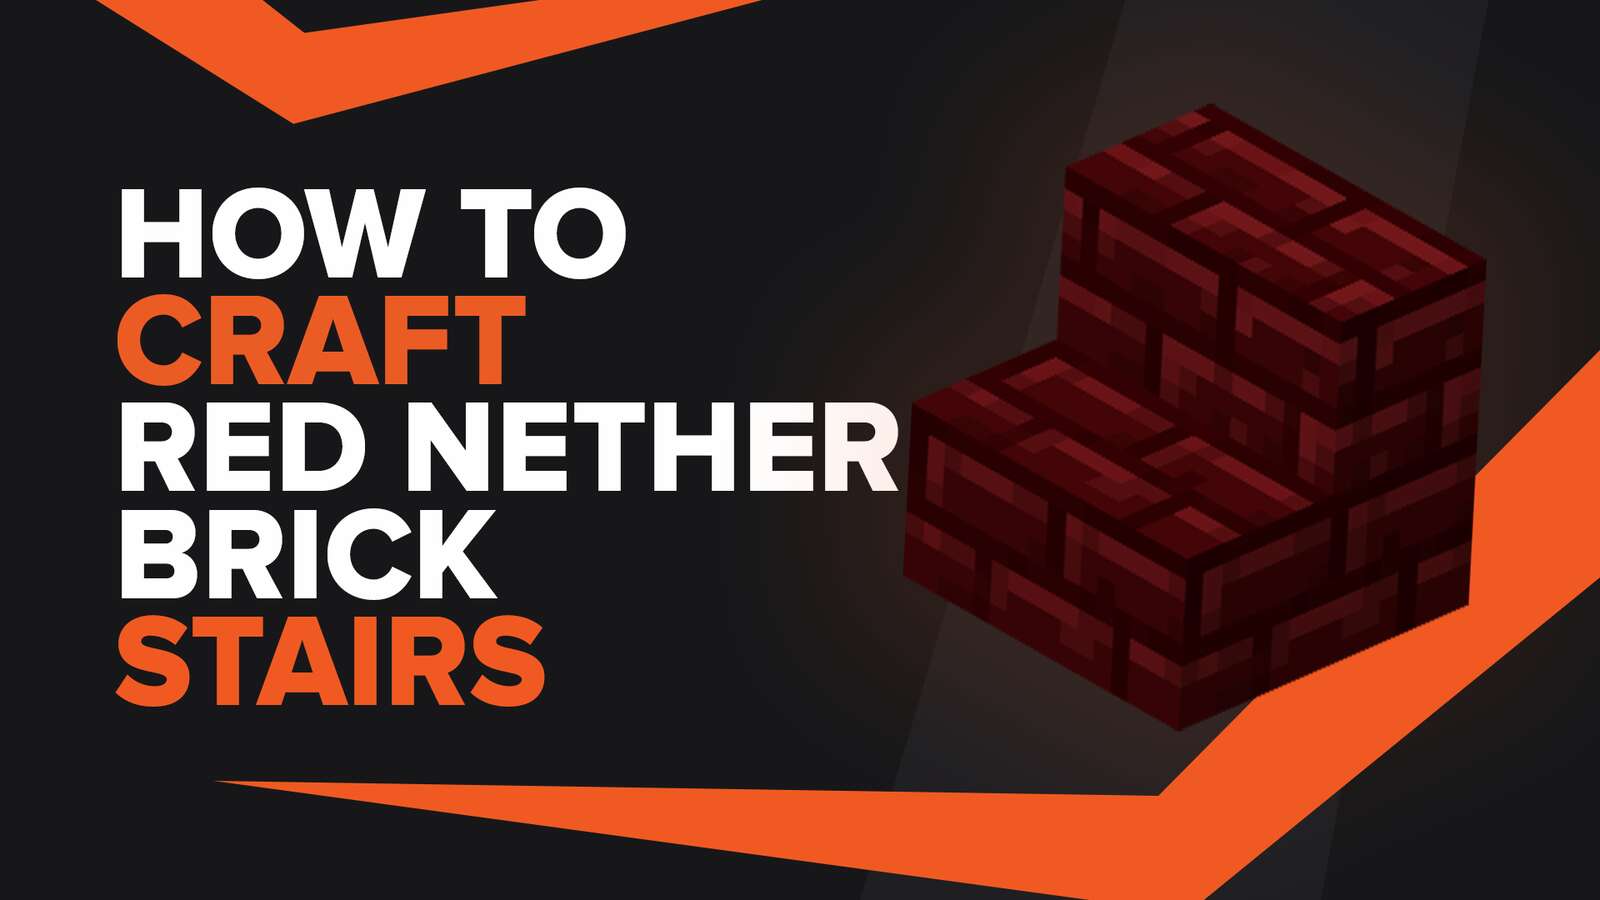 How To Make Red Nether Brick Stairs In Minecraft